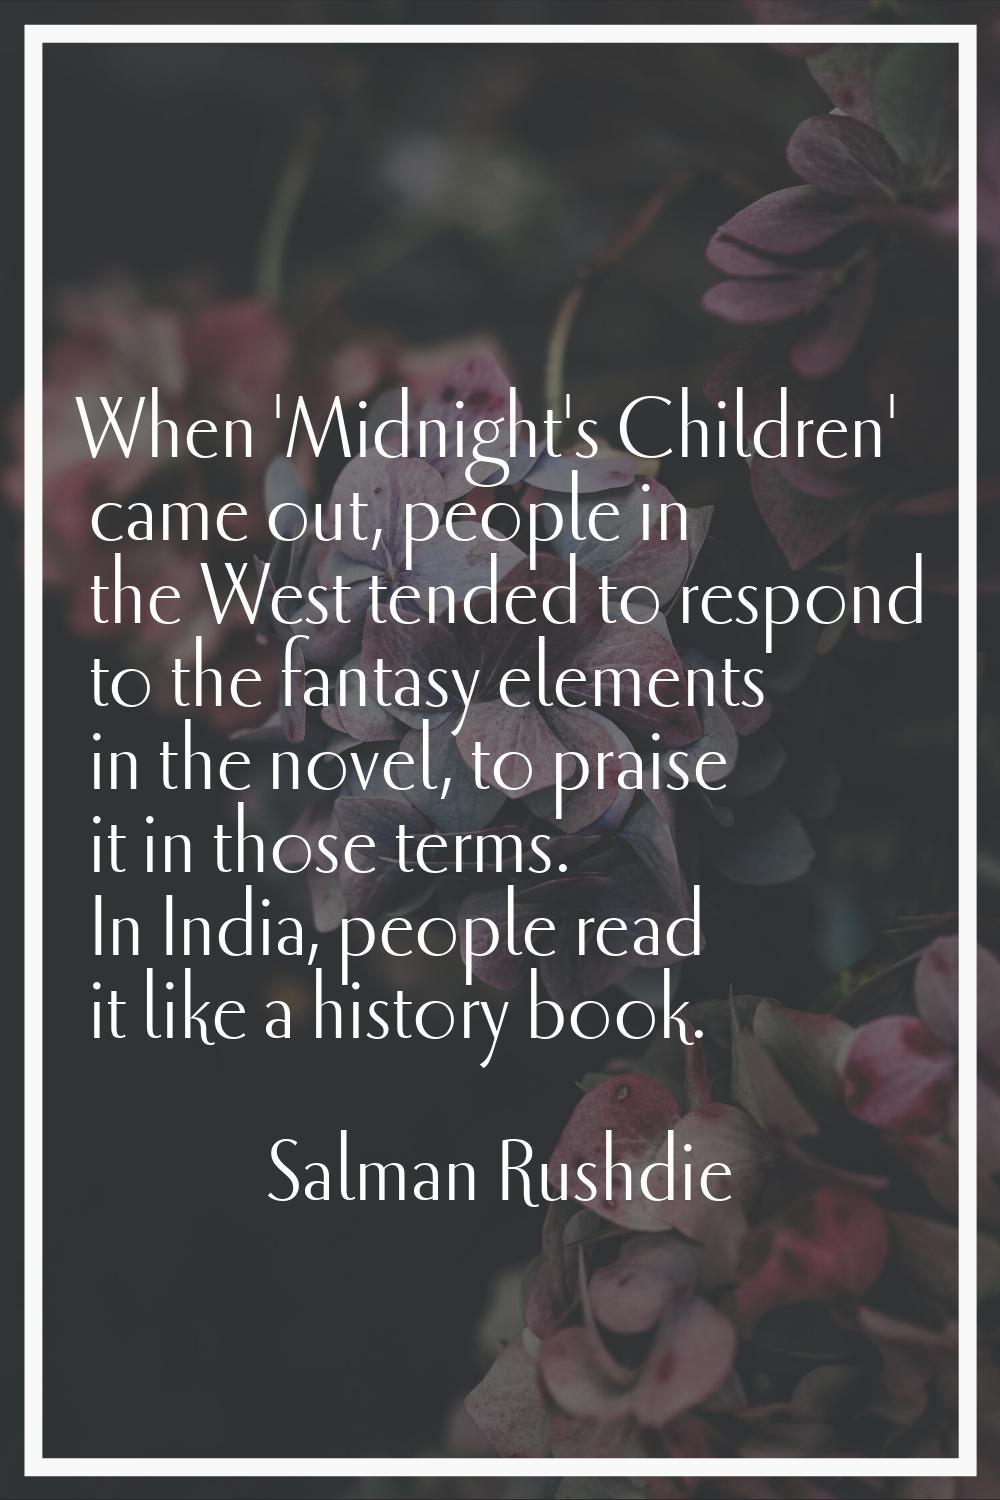 When 'Midnight's Children' came out, people in the West tended to respond to the fantasy elements i